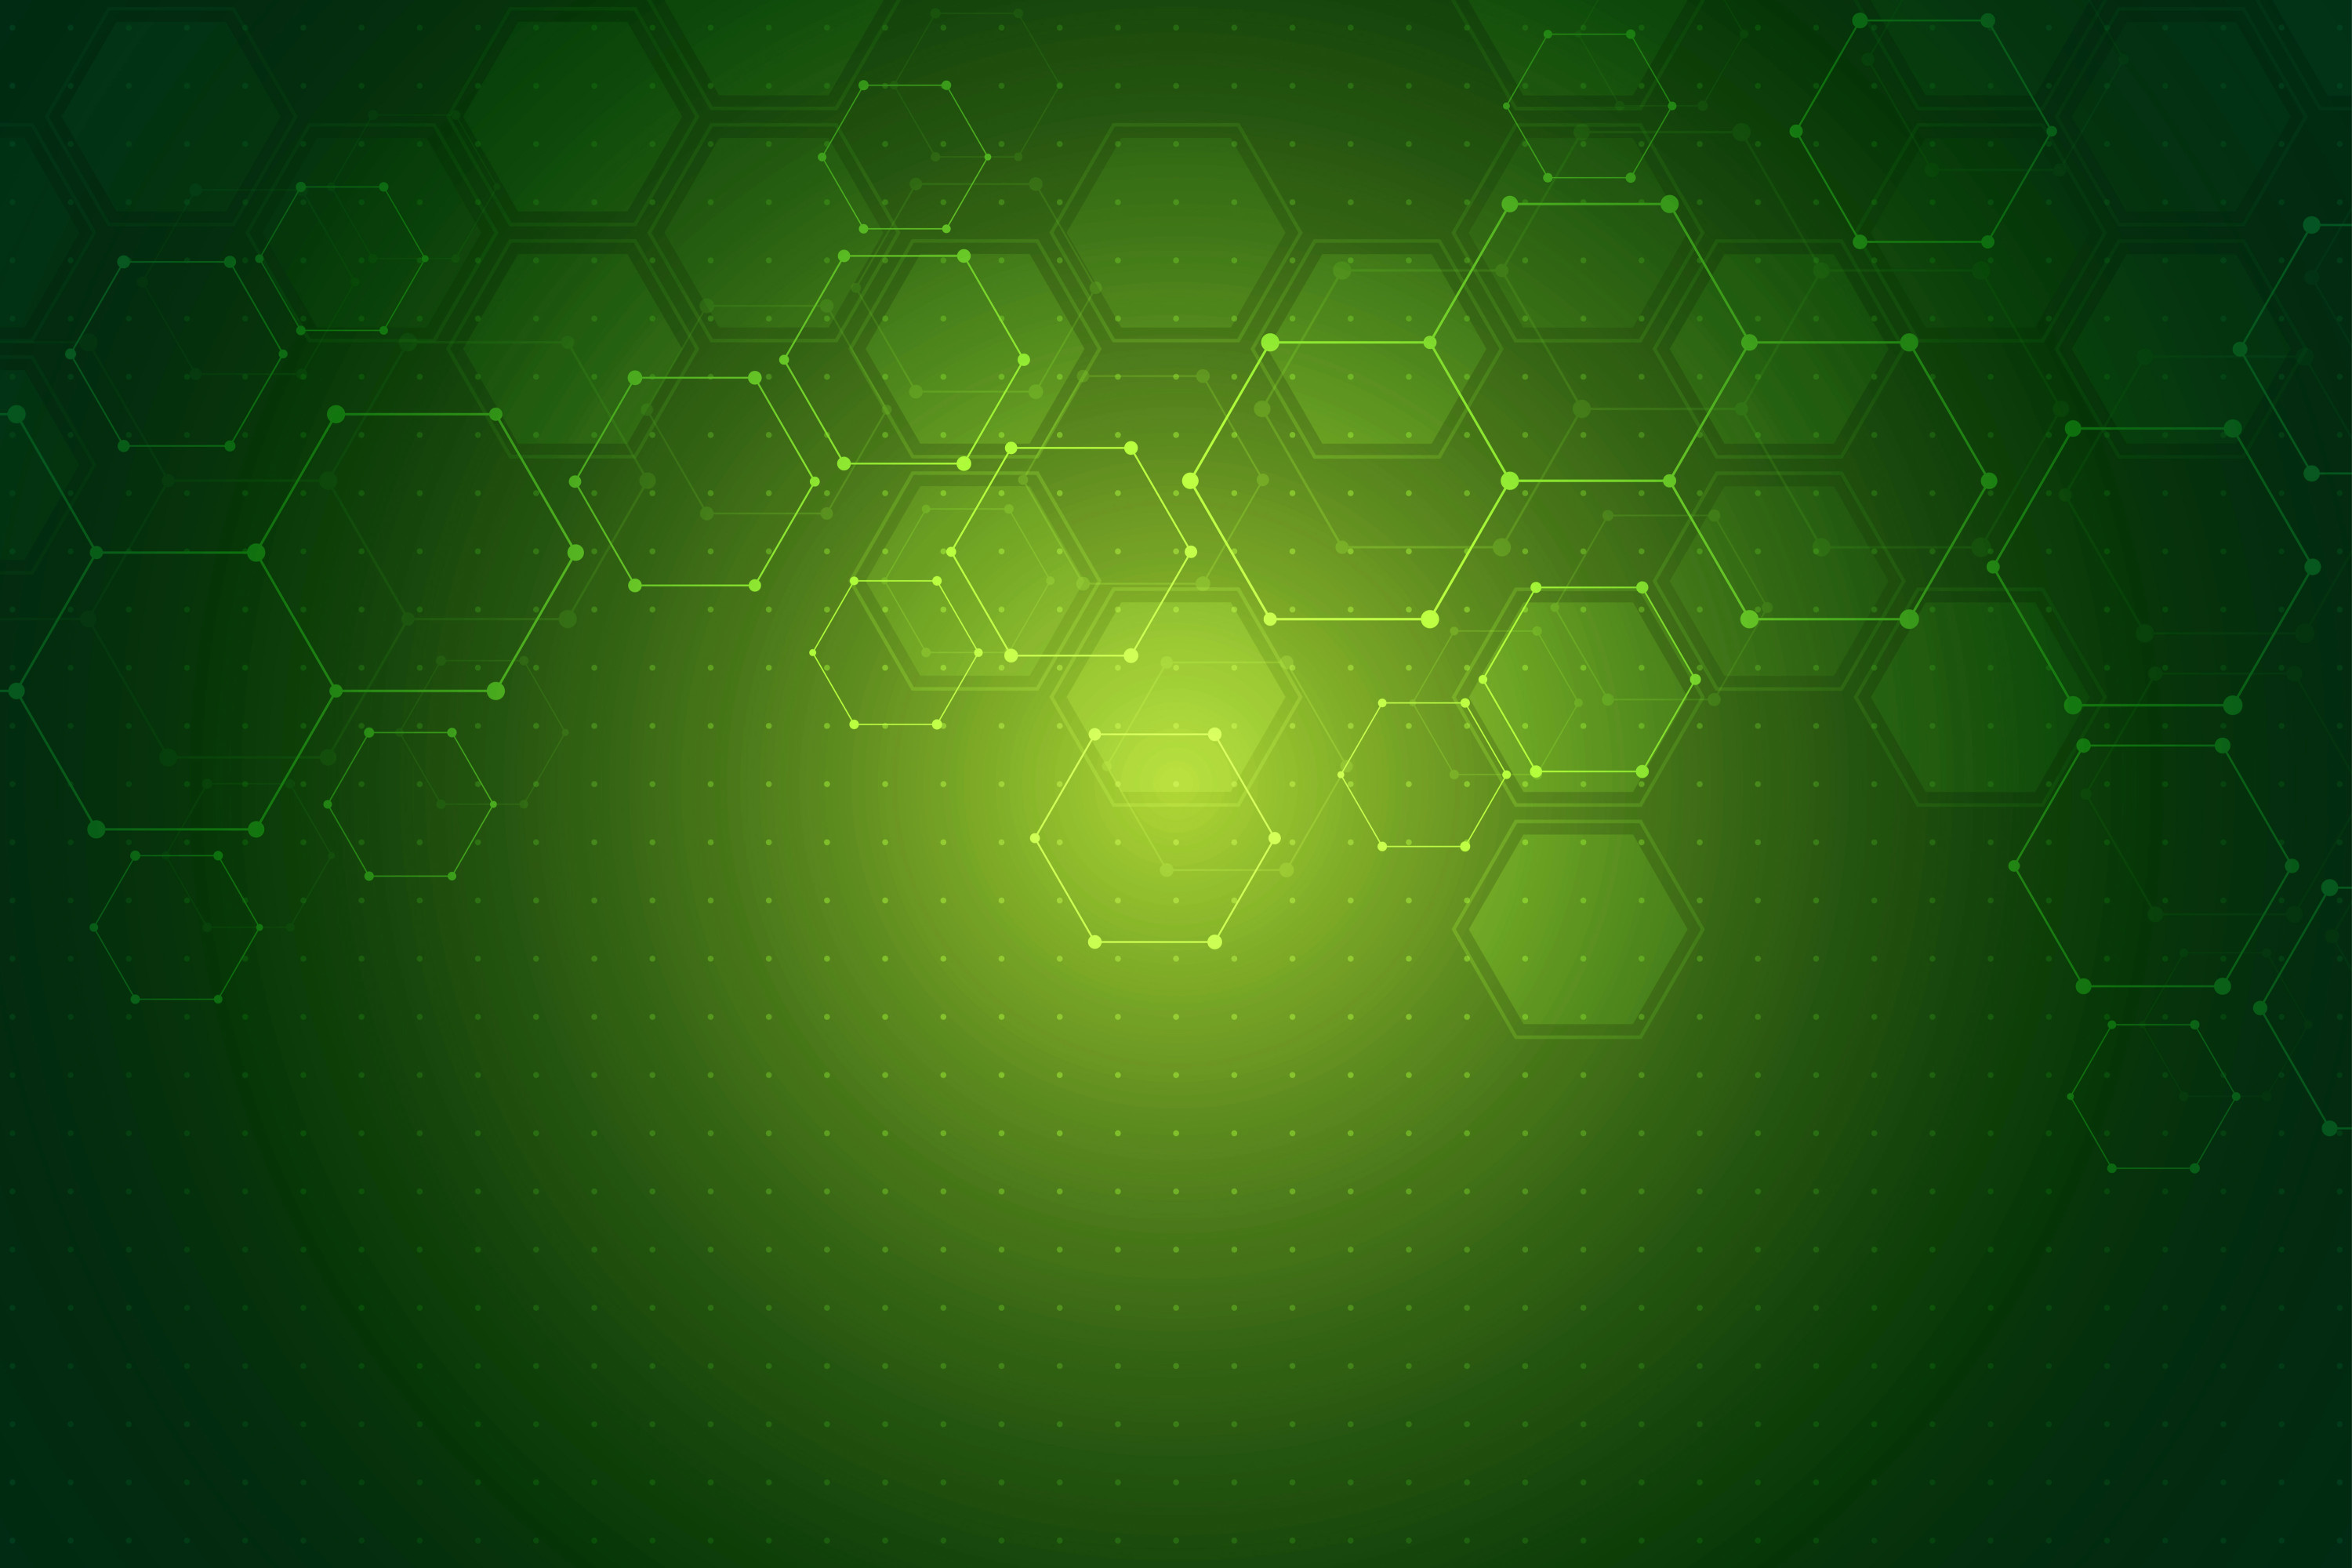 Green background image with light green dots and light green hexagon shapes